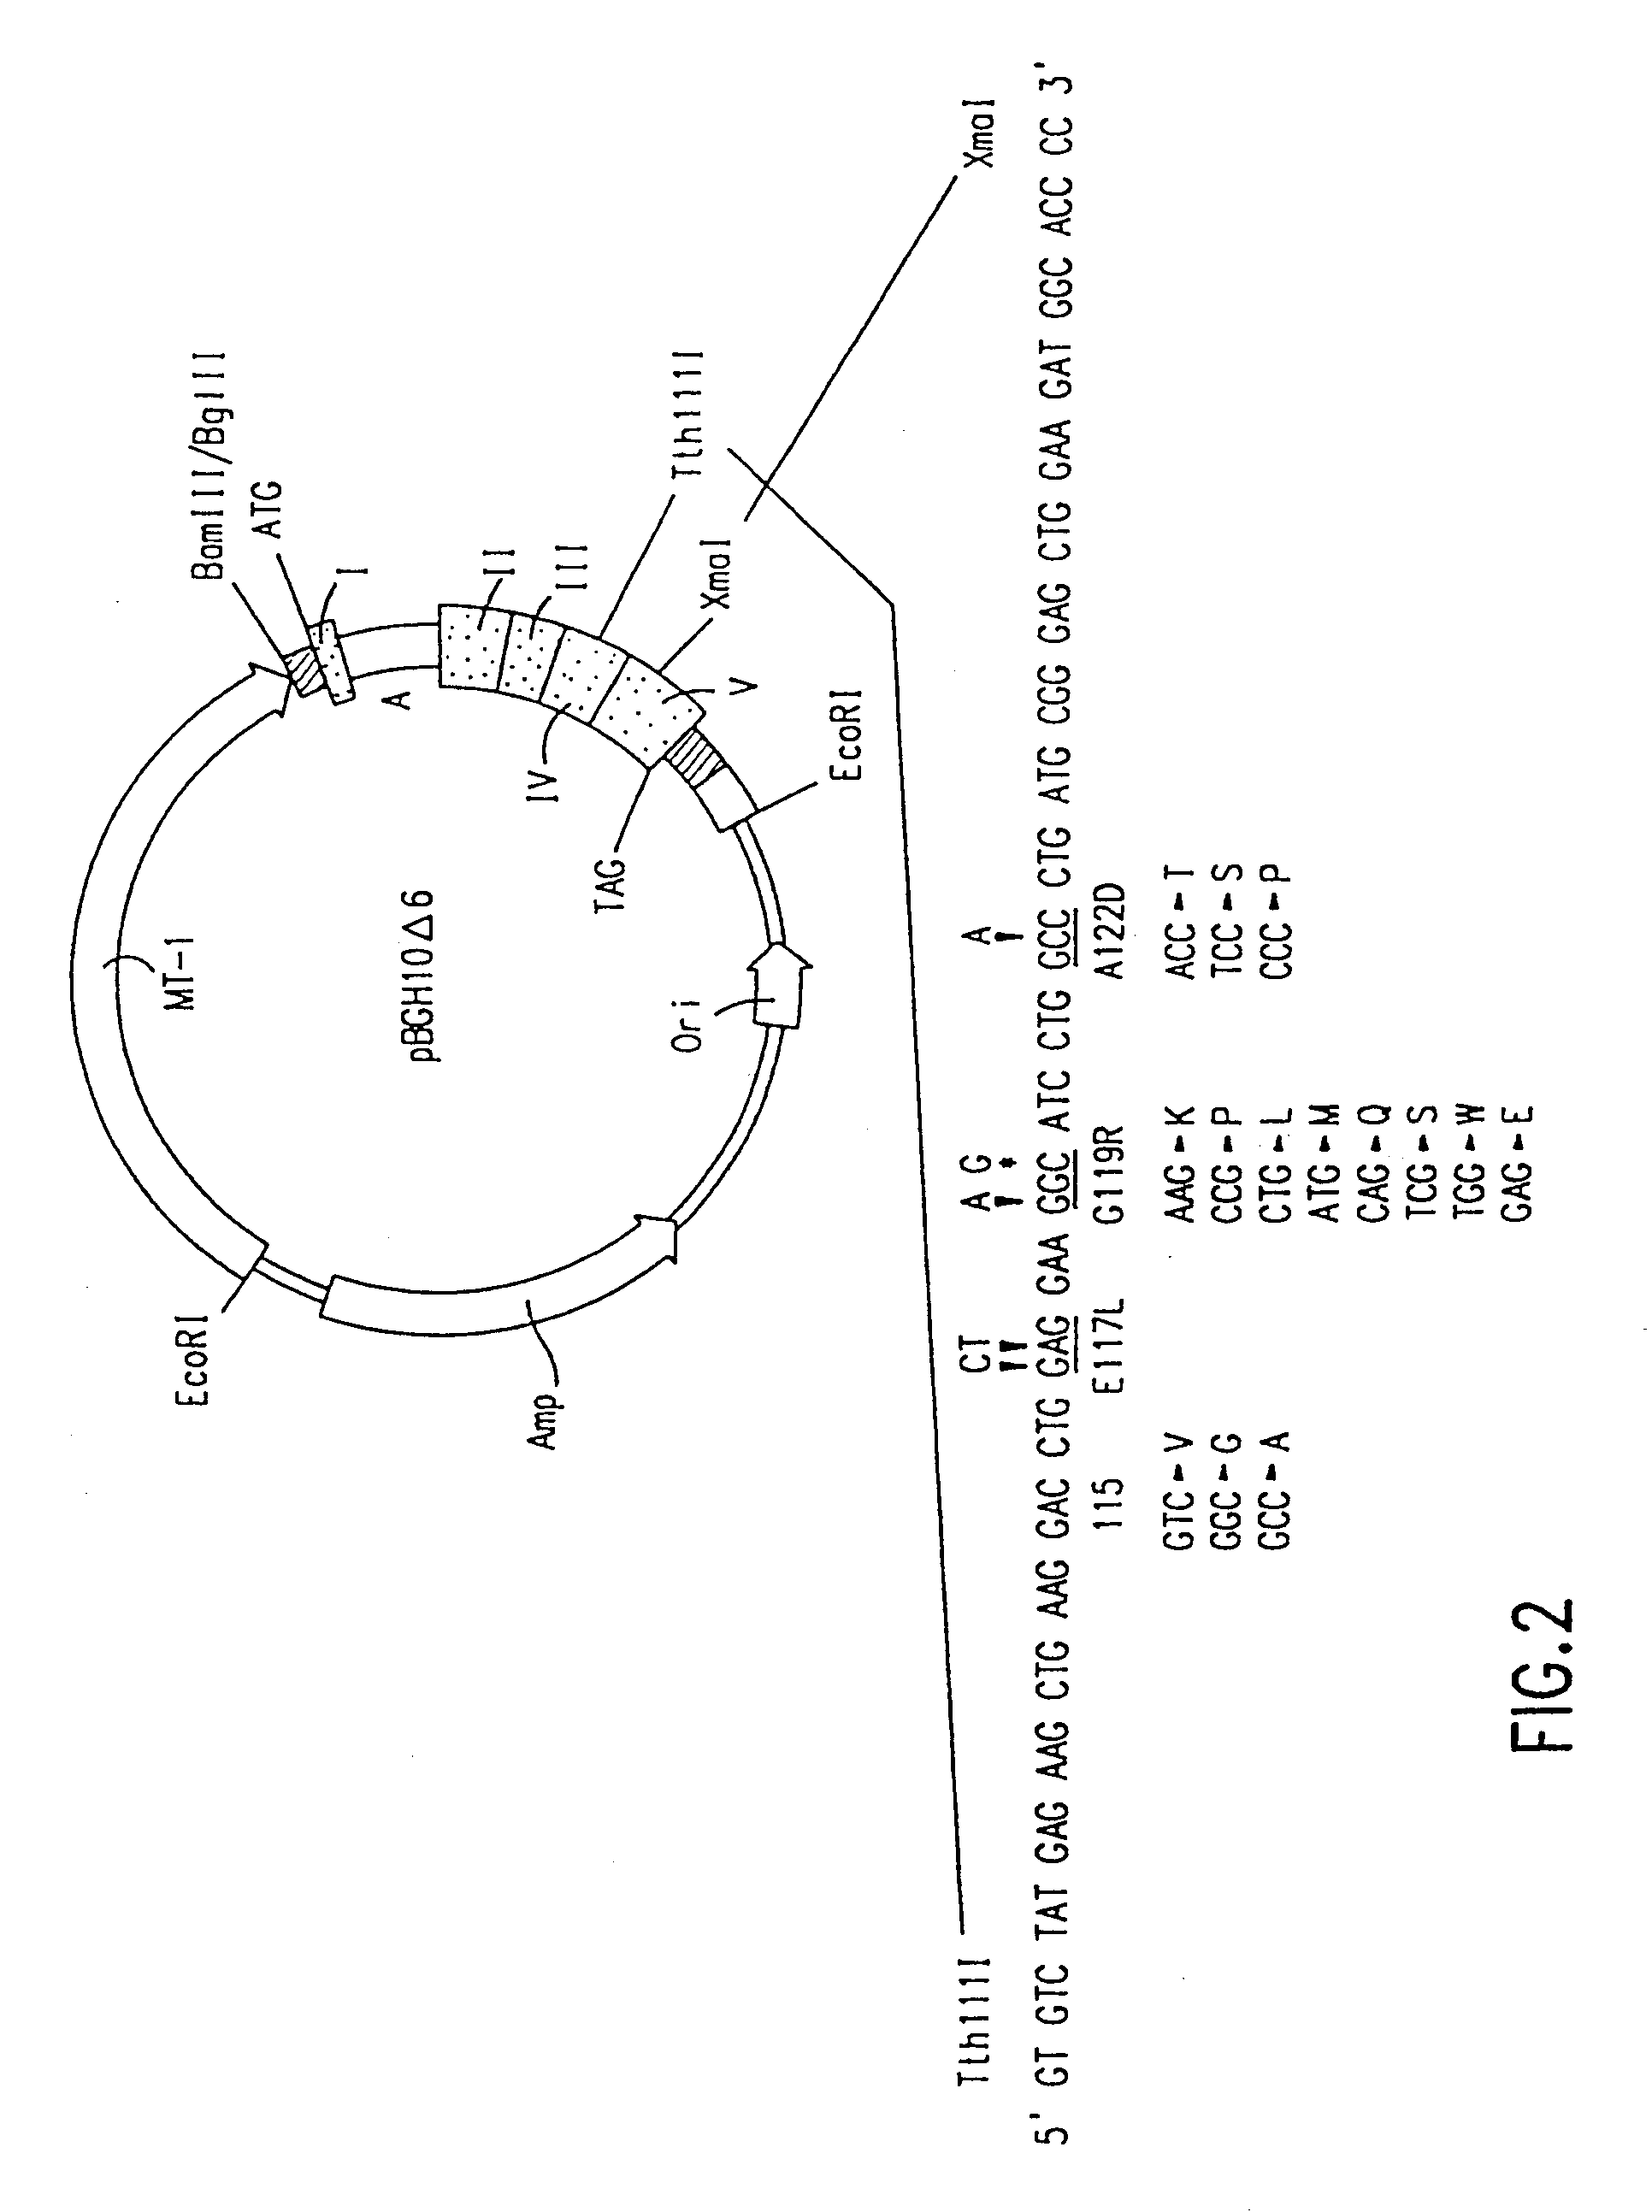 Methods for treating acromegaly and giantism with growth hormone antagonists